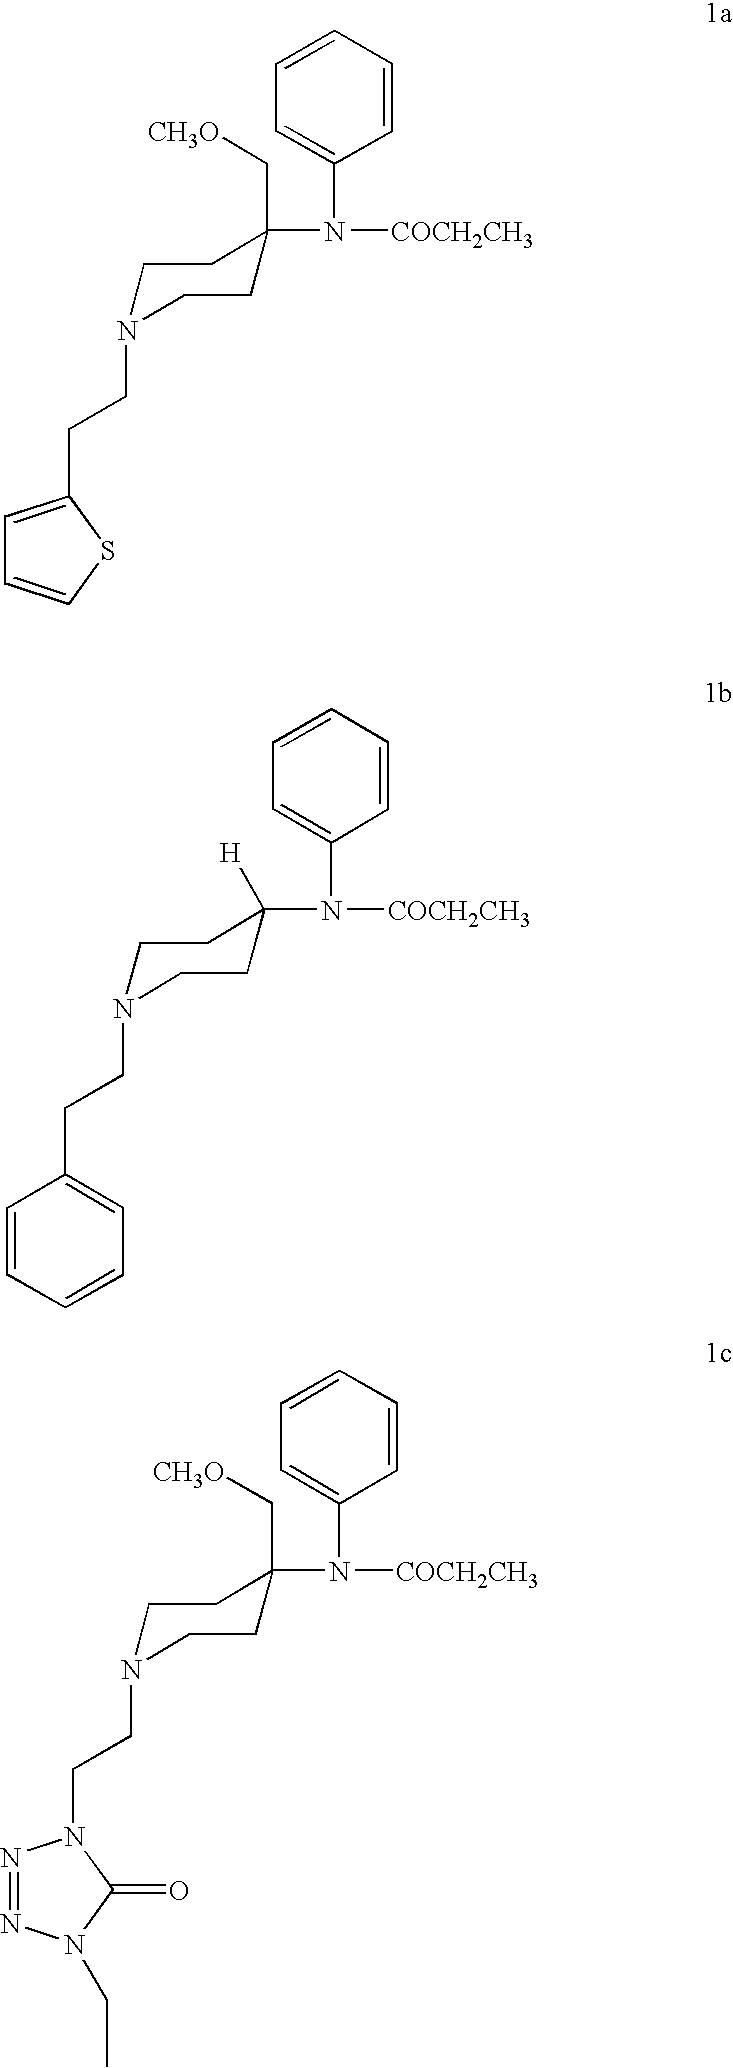 Methods for the syntheses of alfentanil, sufentanil and remifentanil